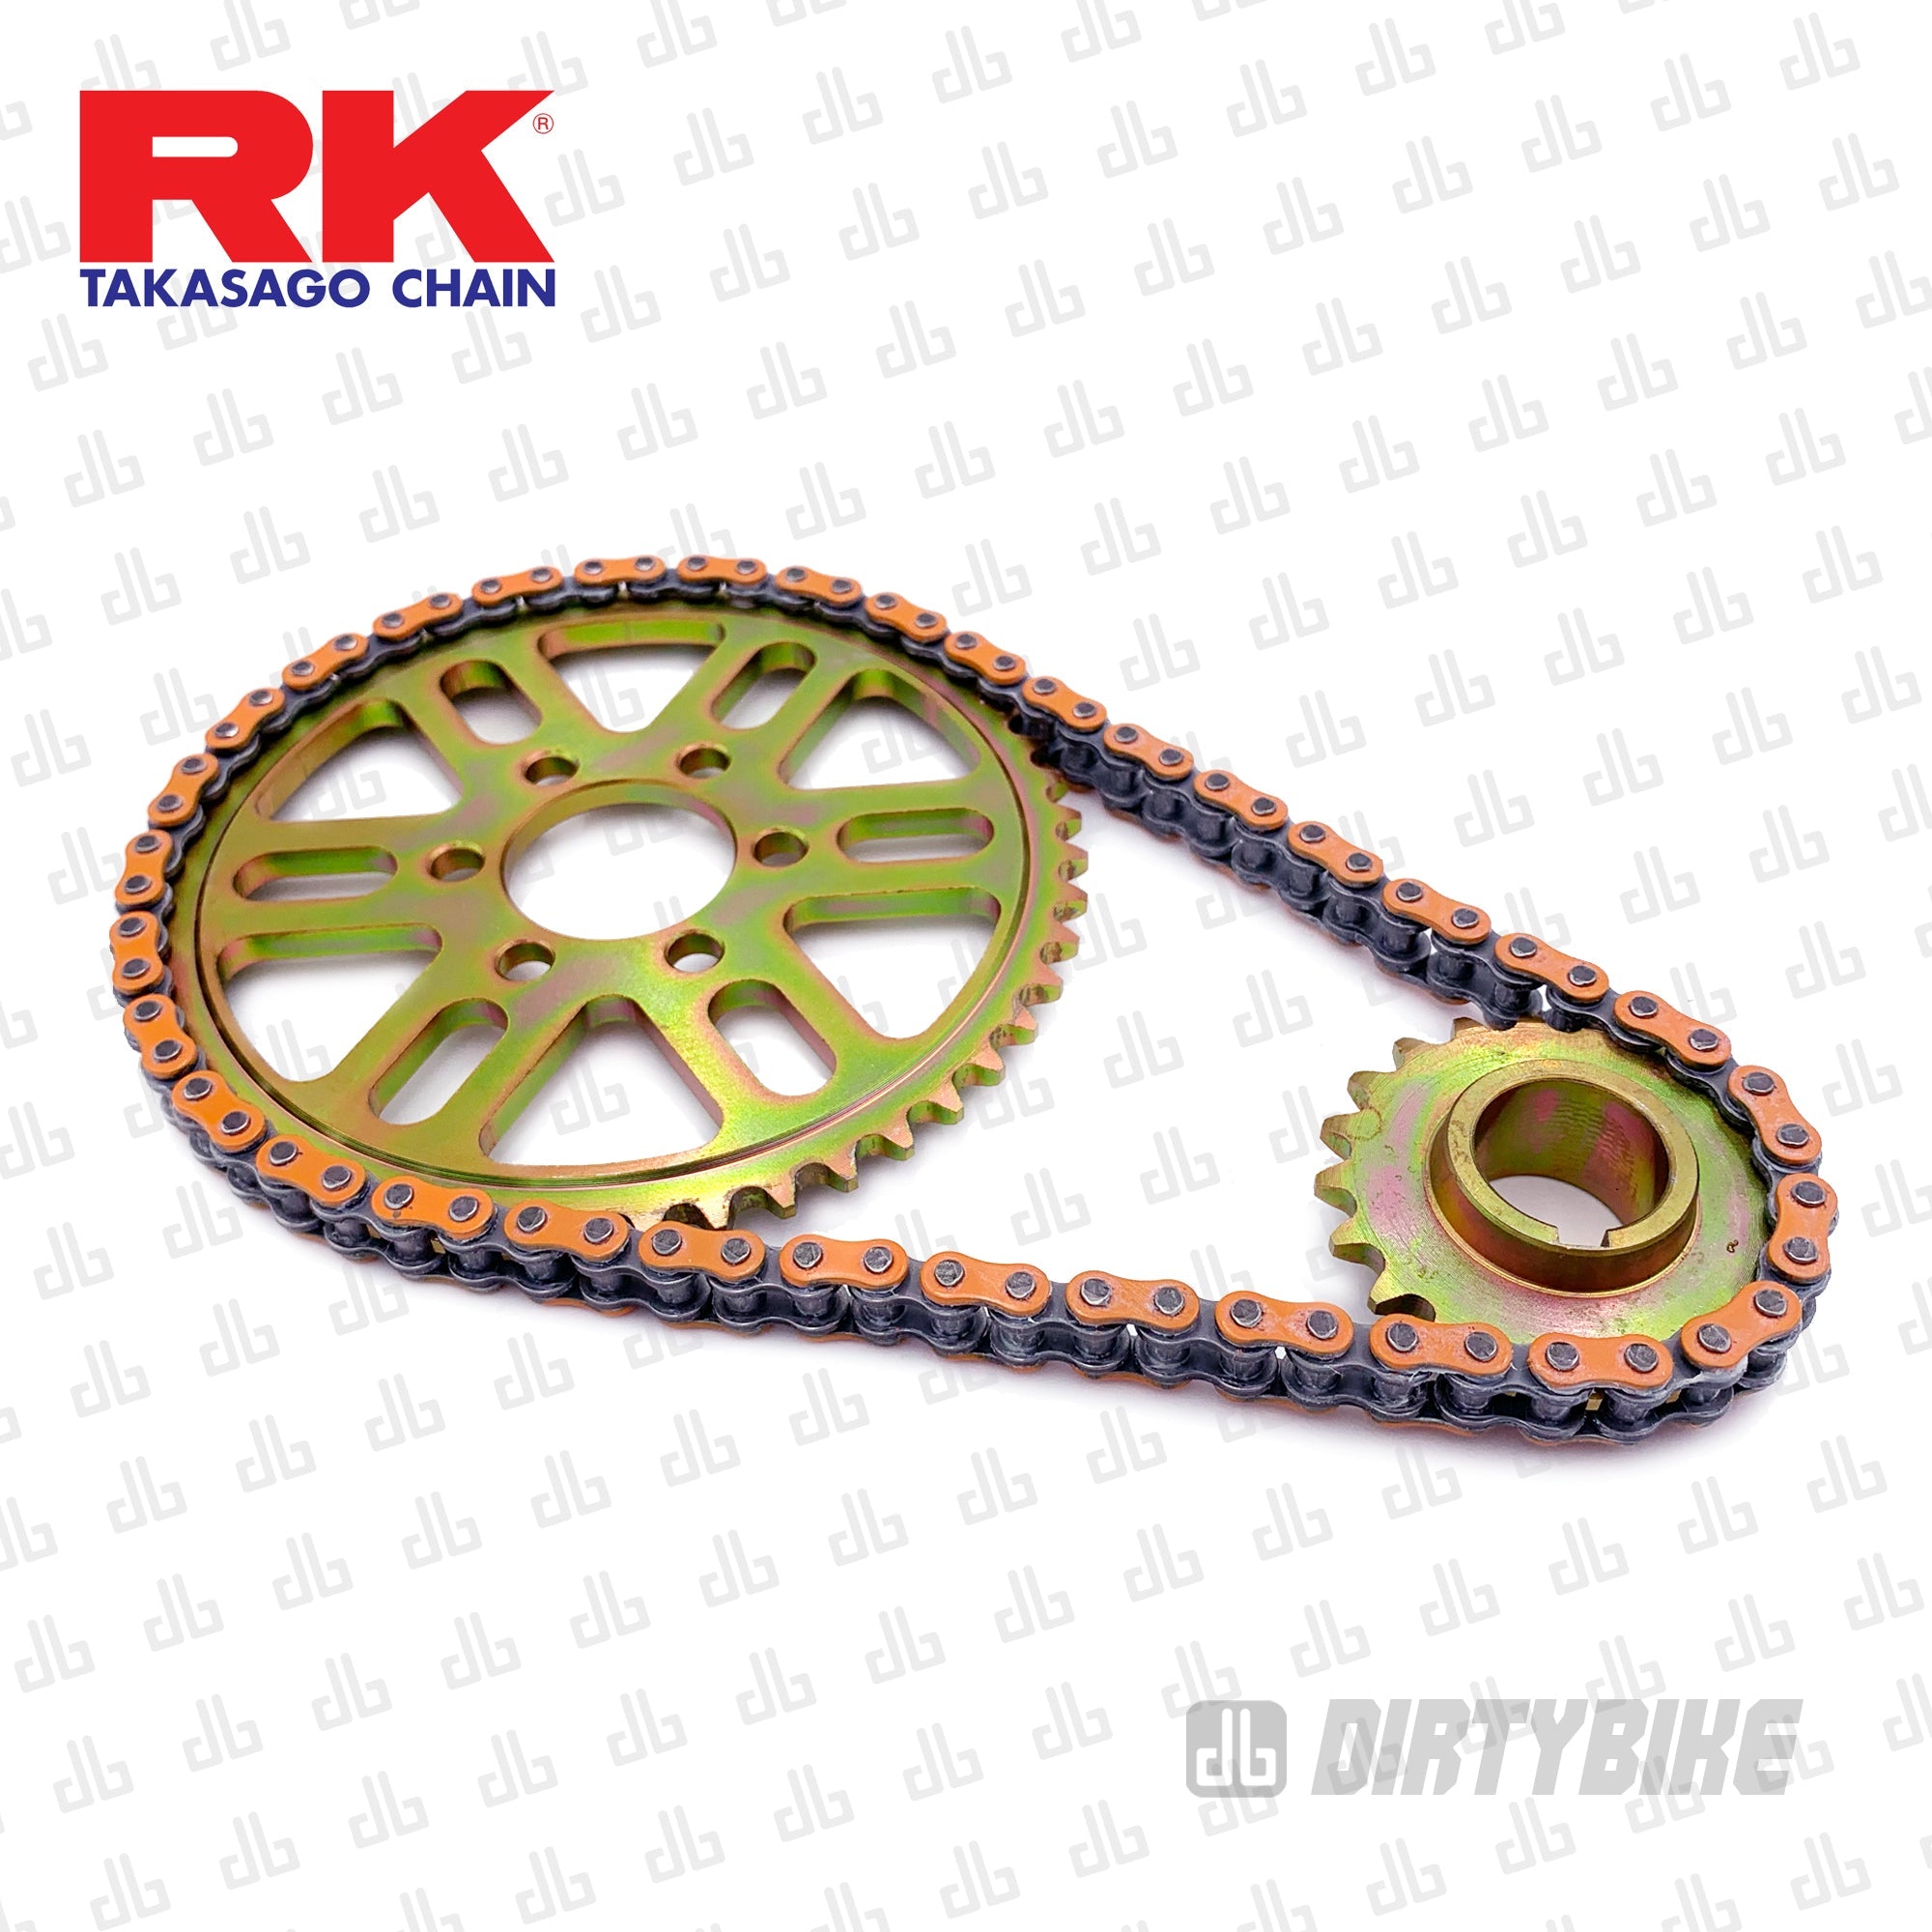 219RK Sealed O-Ring Chain Gold Series Primary Belt to Chain Conversion Kit (Surron LBX)